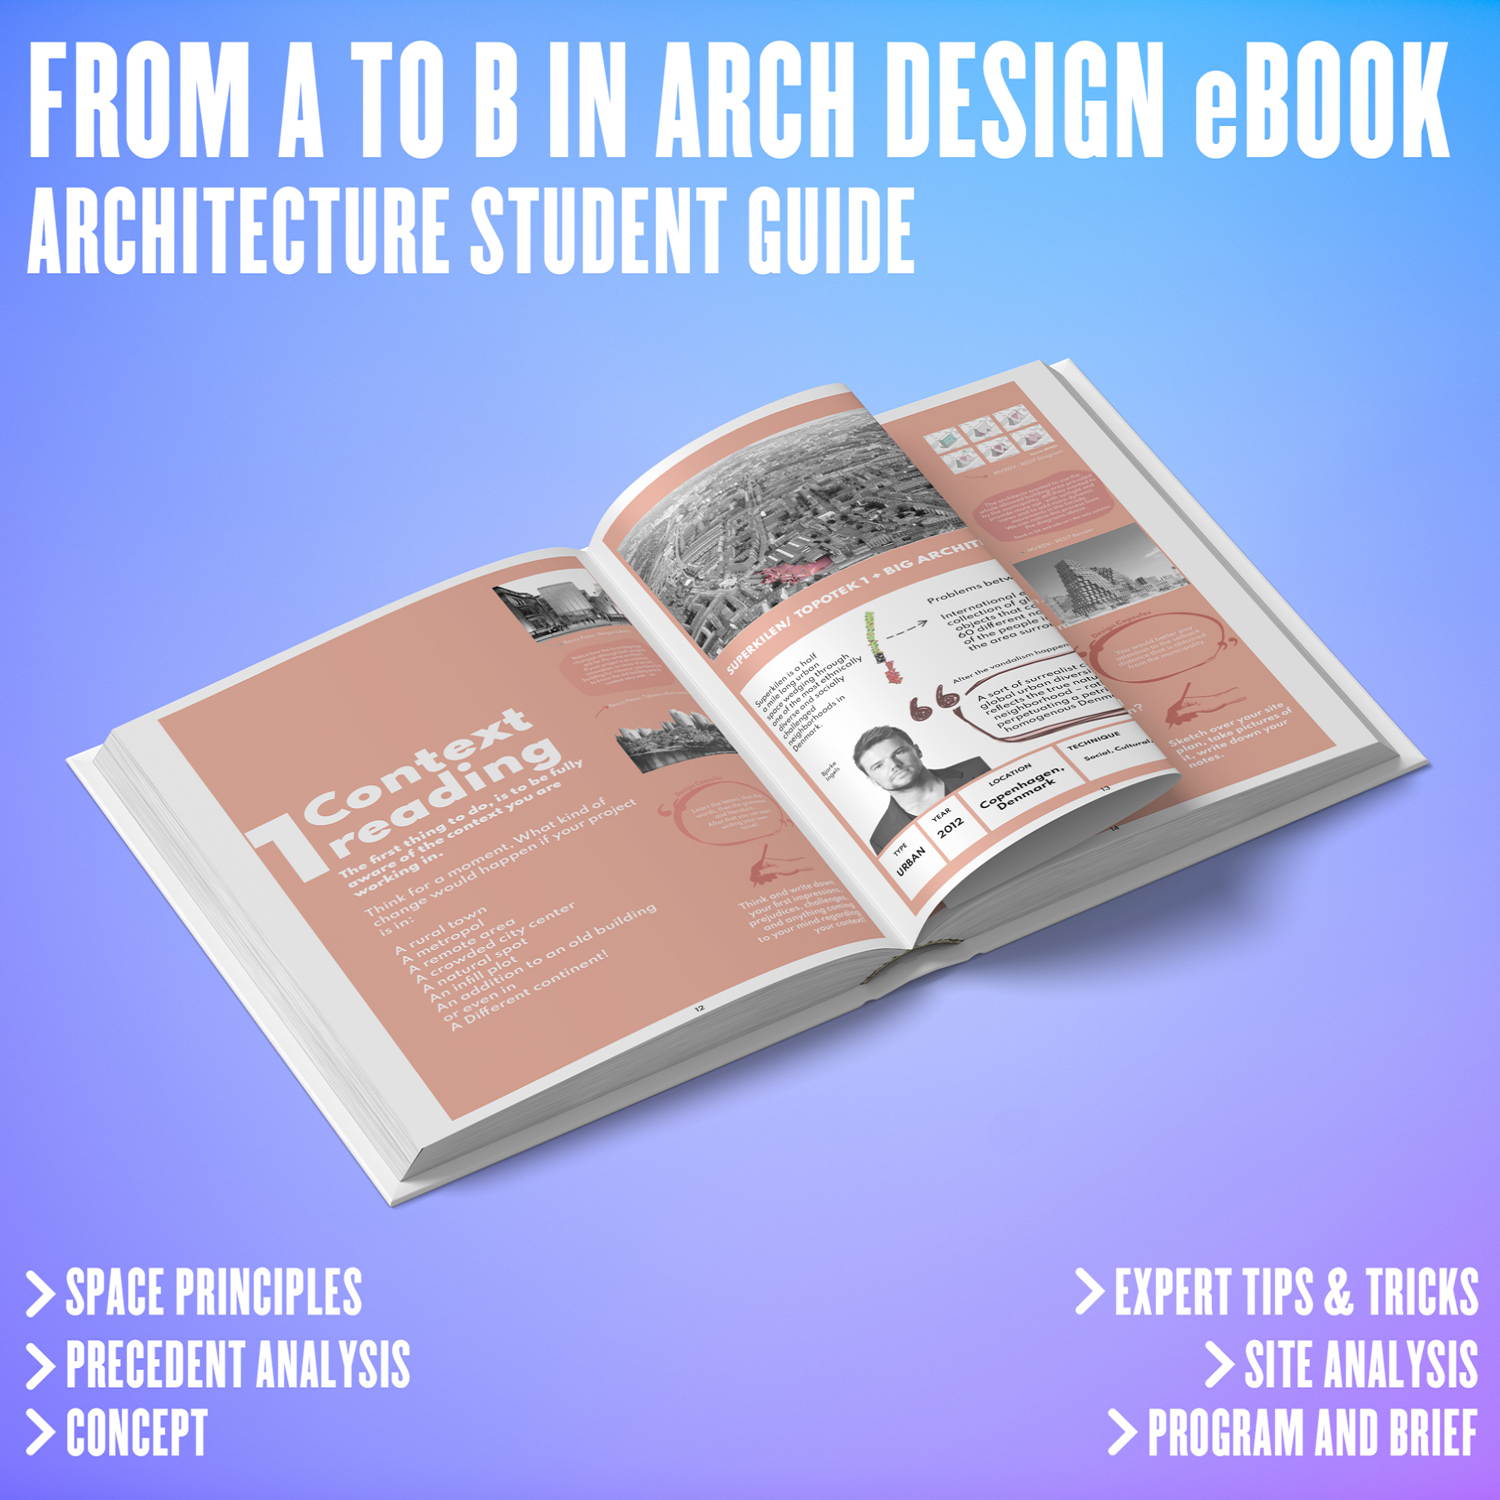 From A to B in Architecture Design eBook